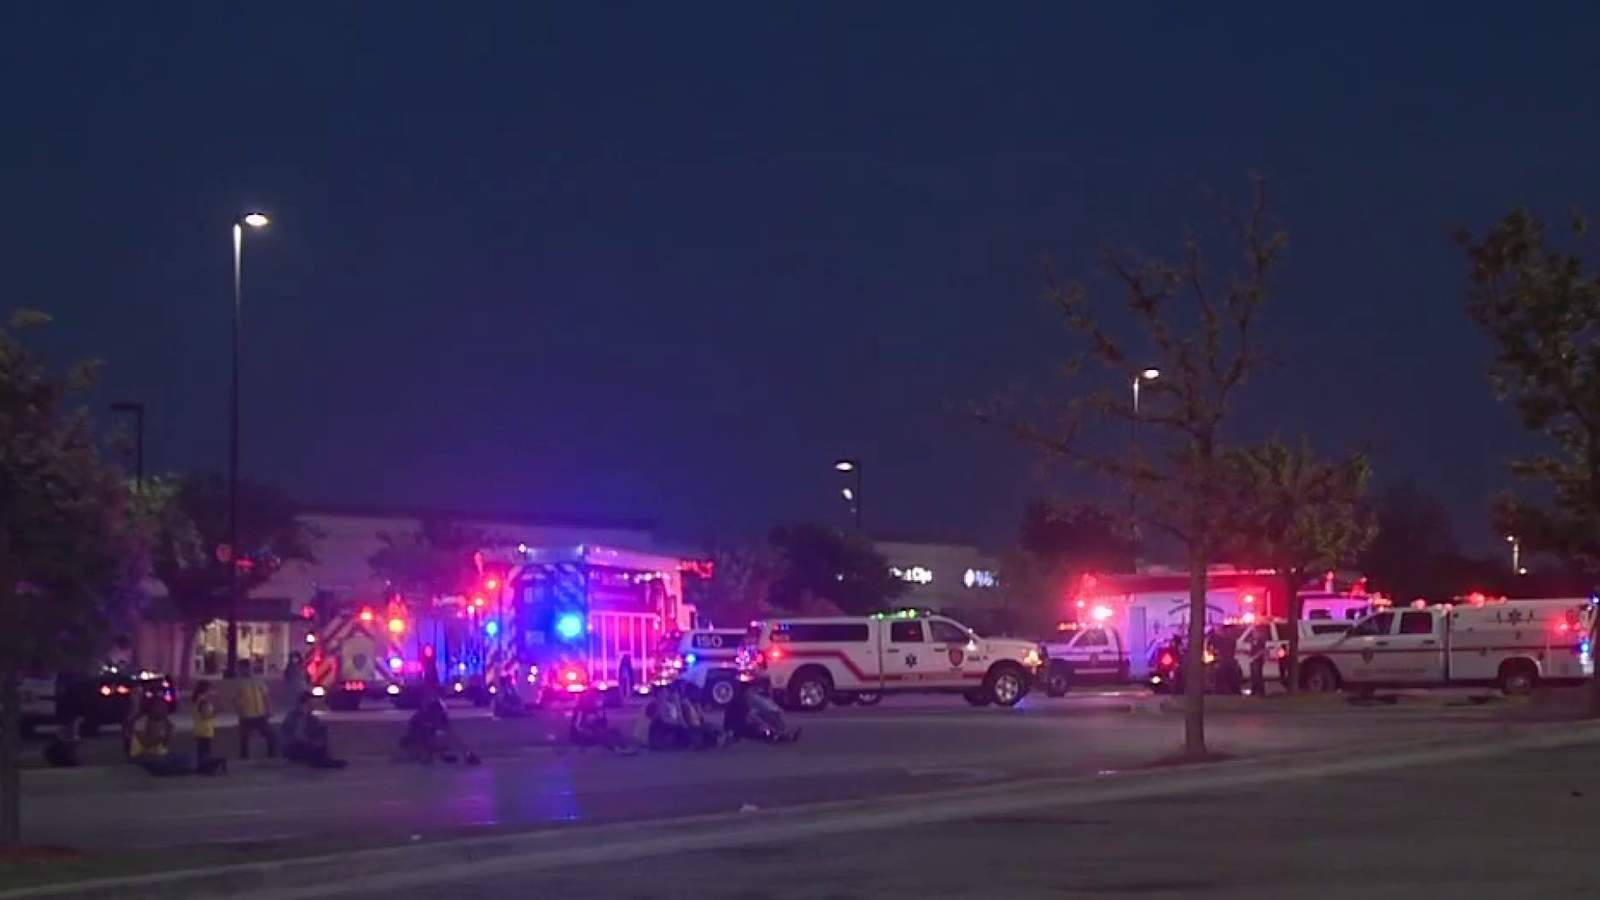 Police say ‘everything clear’ at two separate Walmart stores after bomb threats